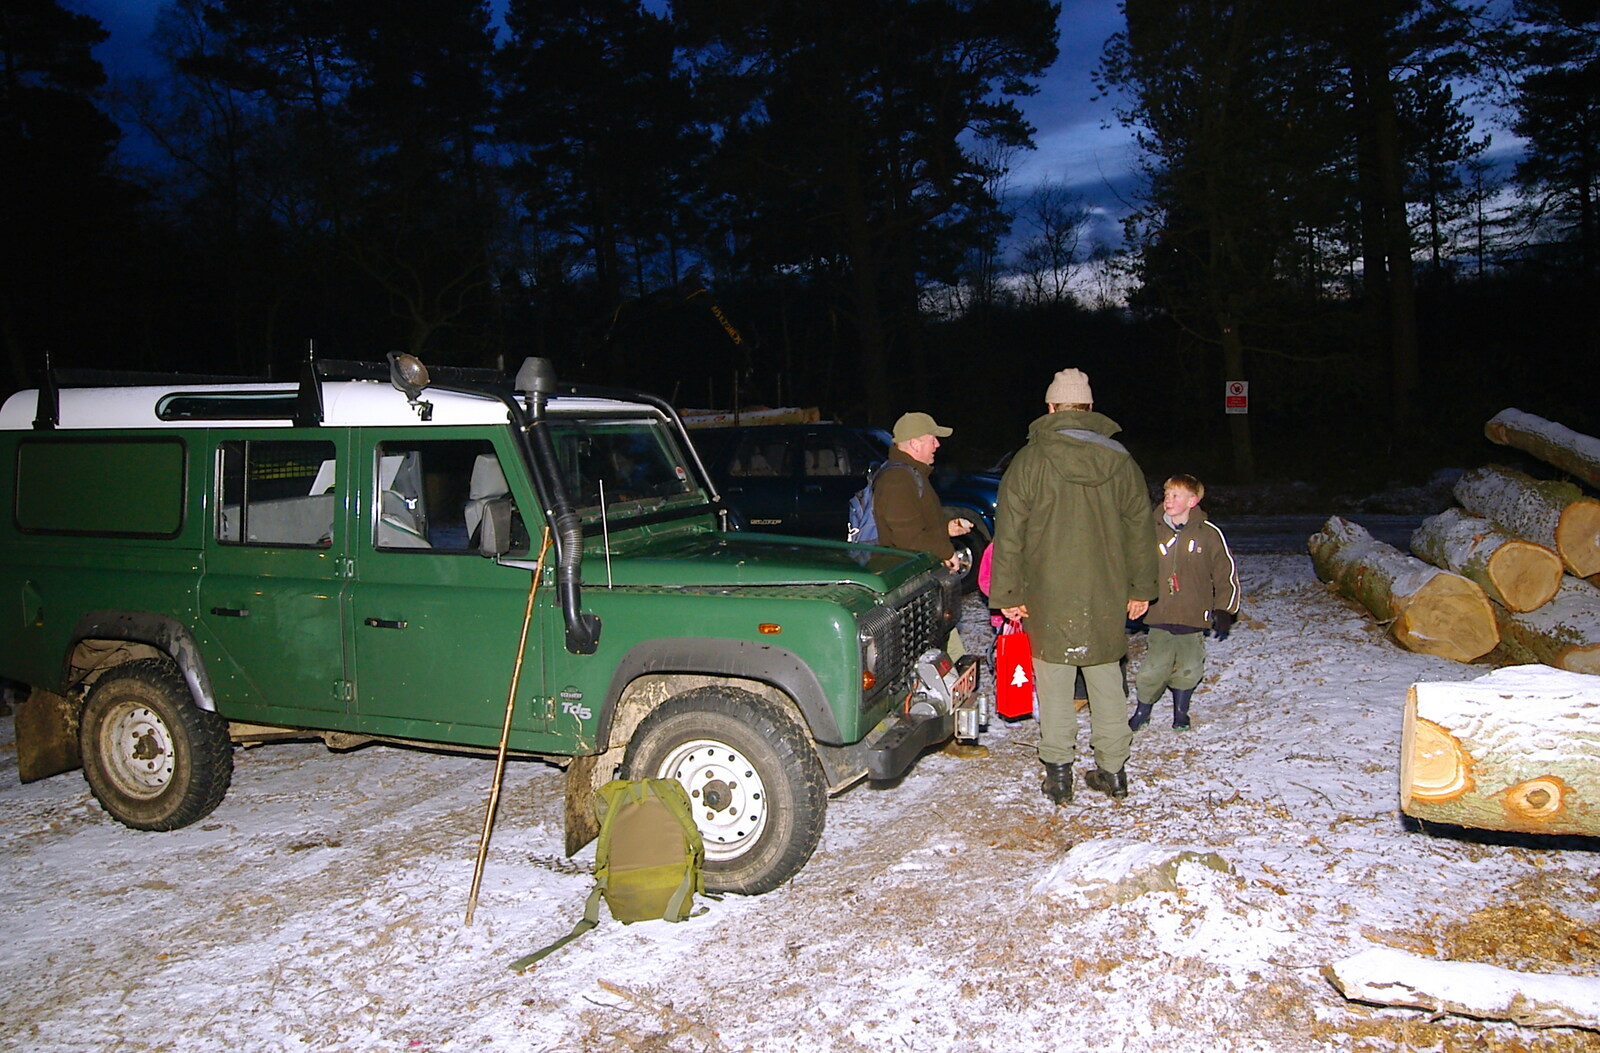 Hanging around the Land Rover from Walk Like a Shadow: A Day With Ray Mears, Ashdown Forest, East Sussex - 29th December 2005